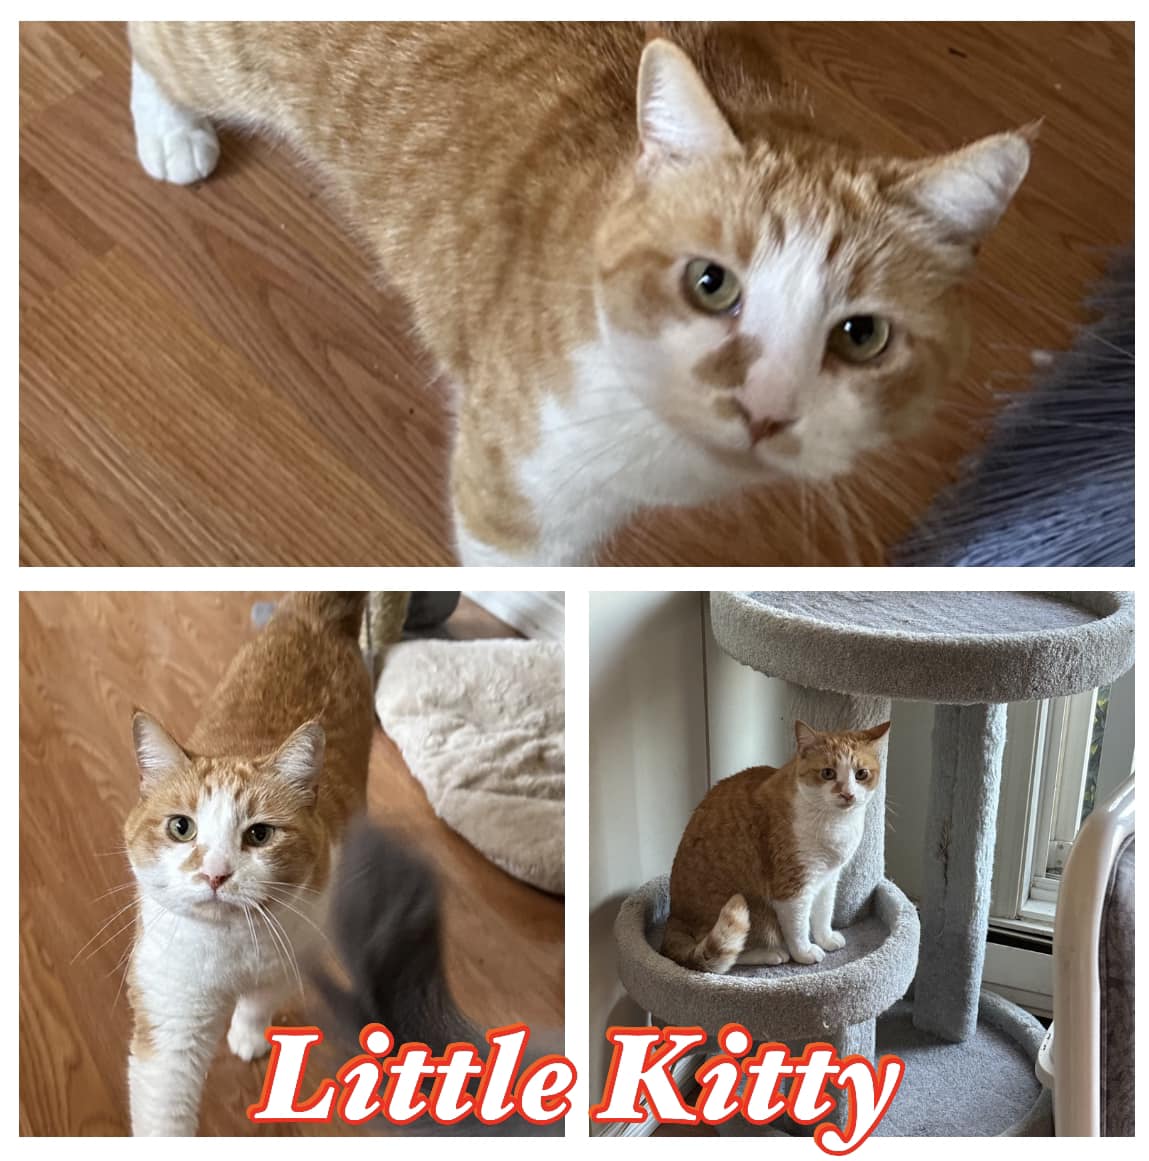 little kitty, orange and white cat for adoption